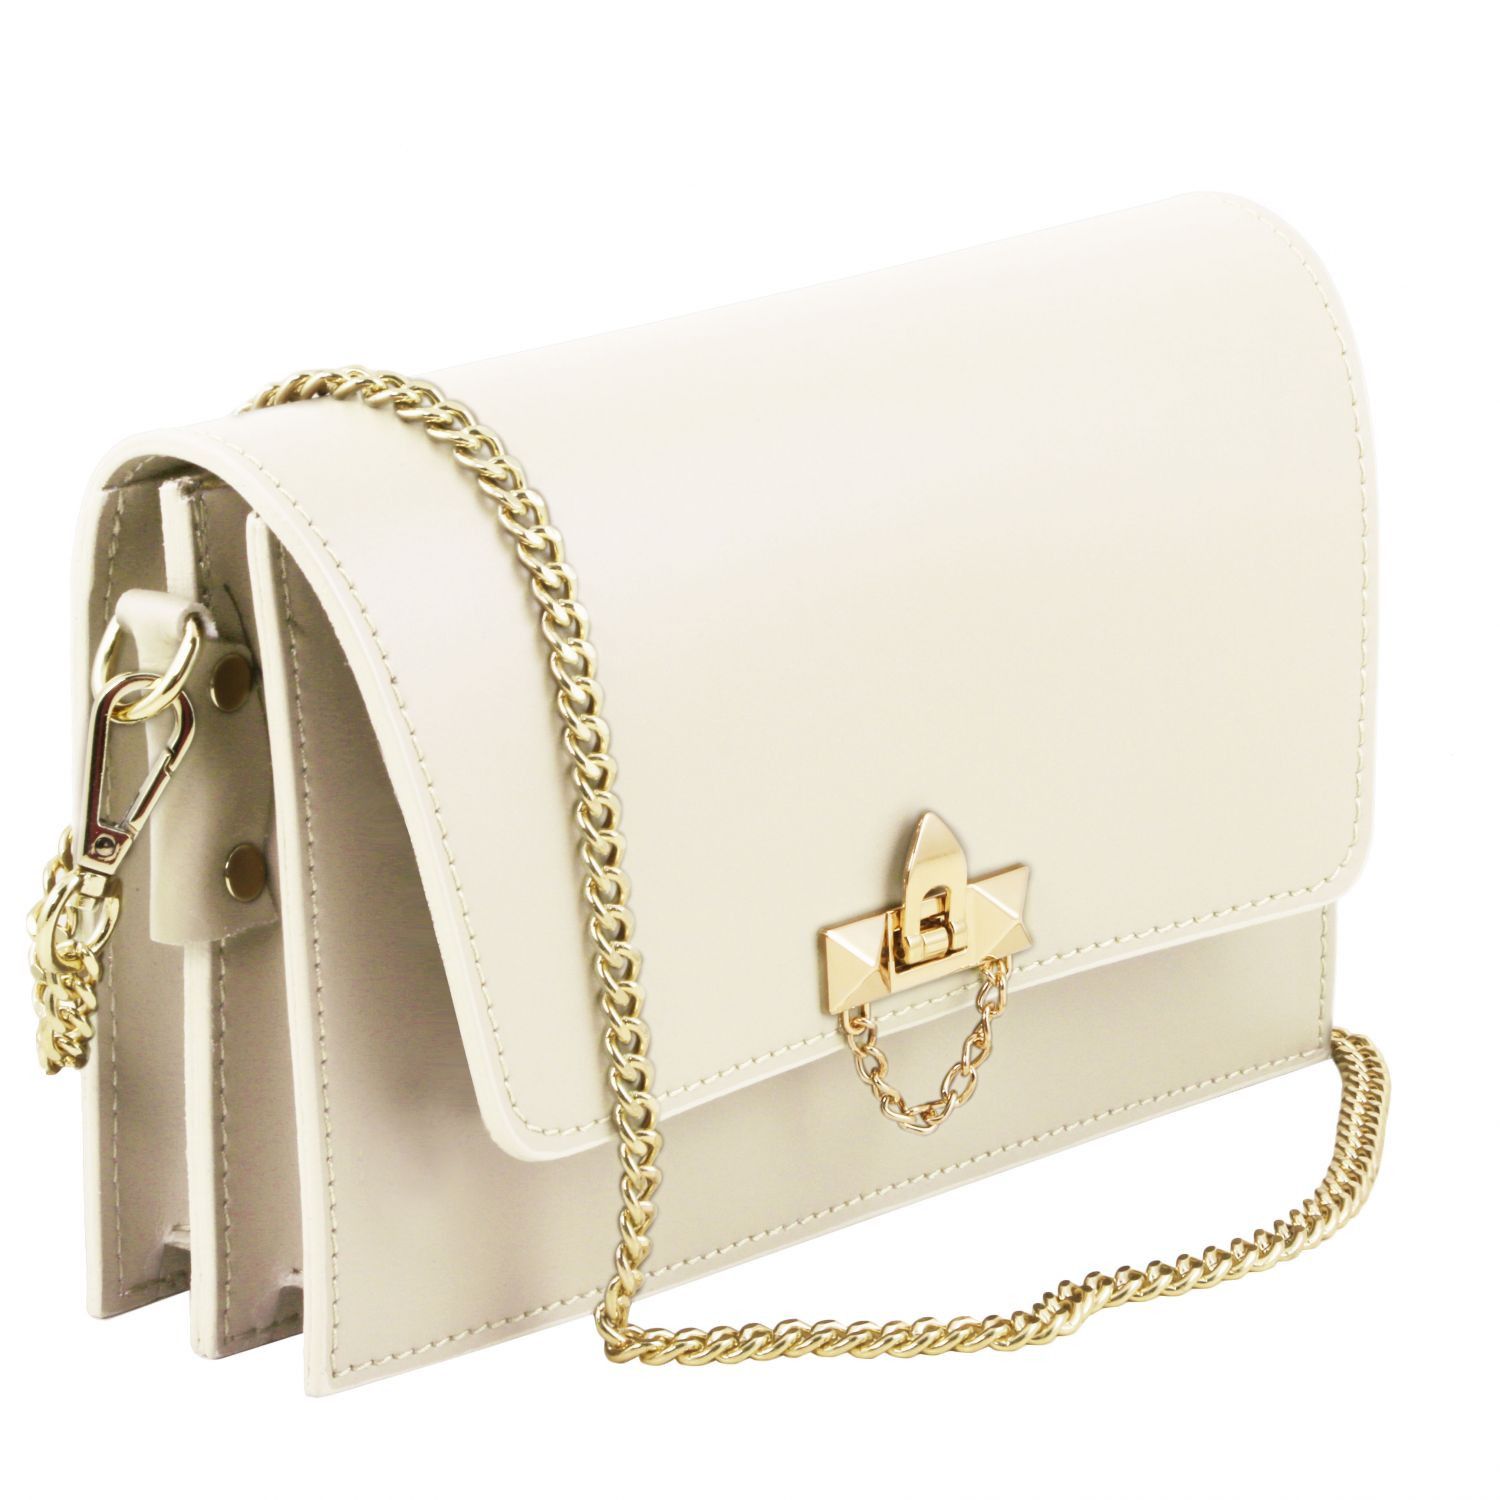 TL Bag Ruga Leather Clutch With Chain Strap Ivory TL141653